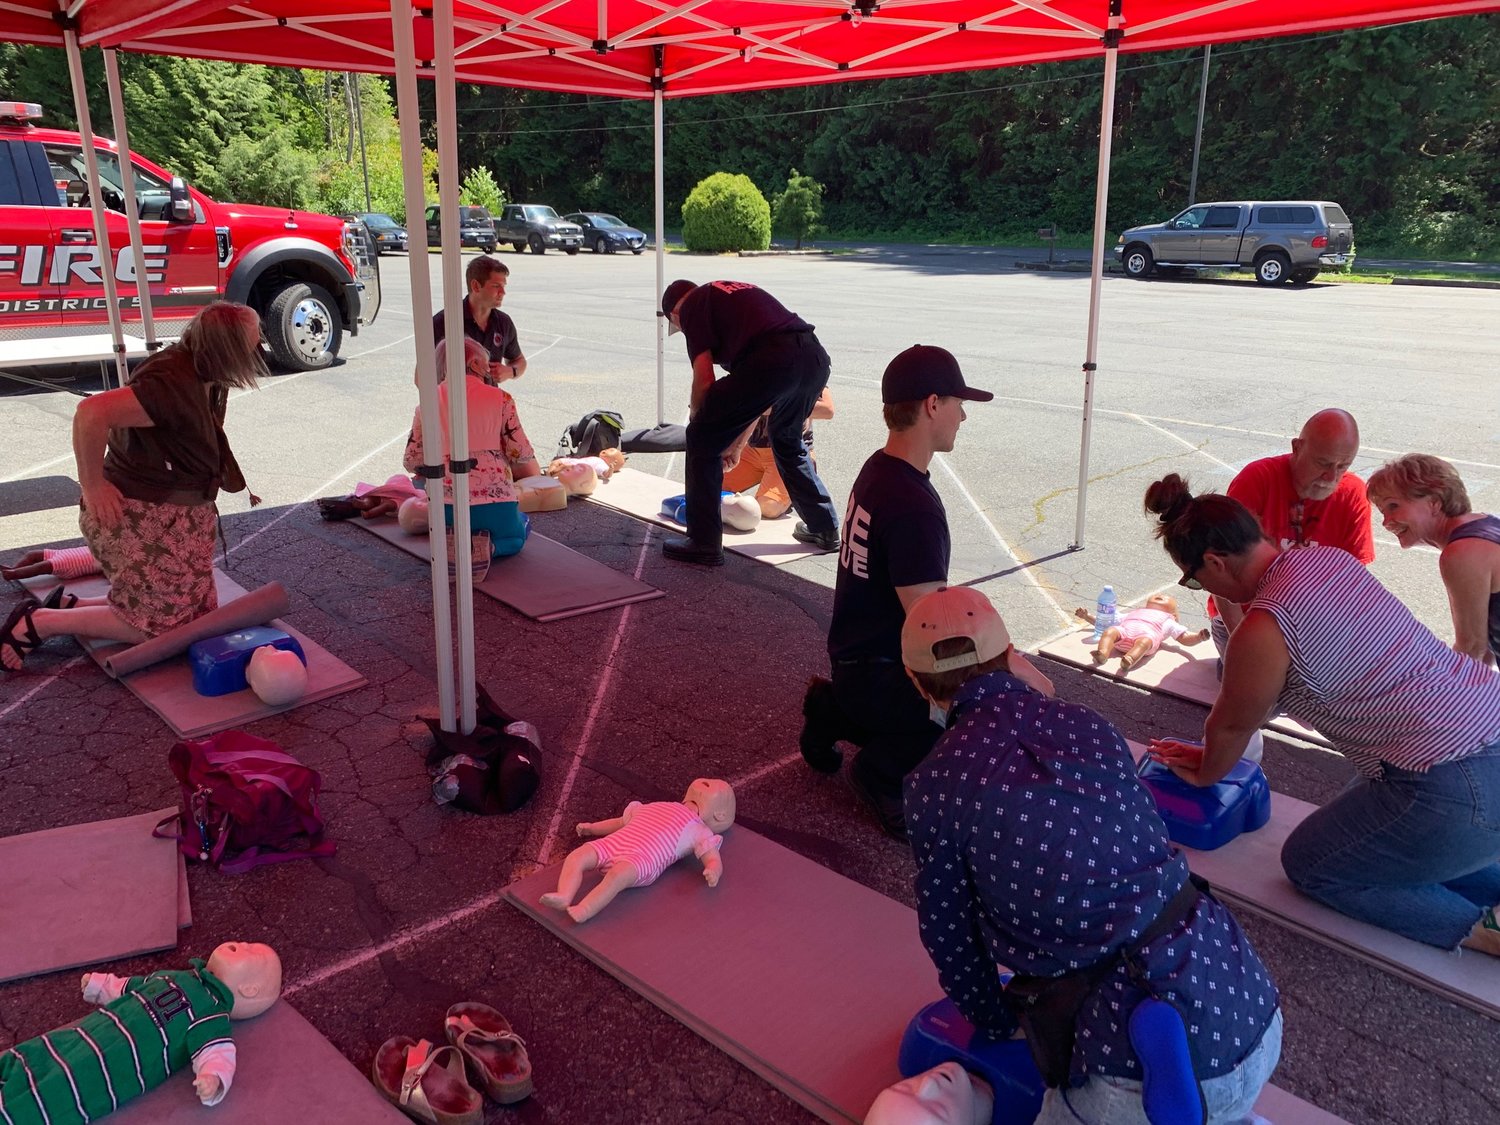 The Point Roberts fire district will continue classes to teach CPR on Saturday, August 13 and Sunday, August 28 at 1 p.m. at the Benson Road firehall. Email chief@wcfd5.com if interested.